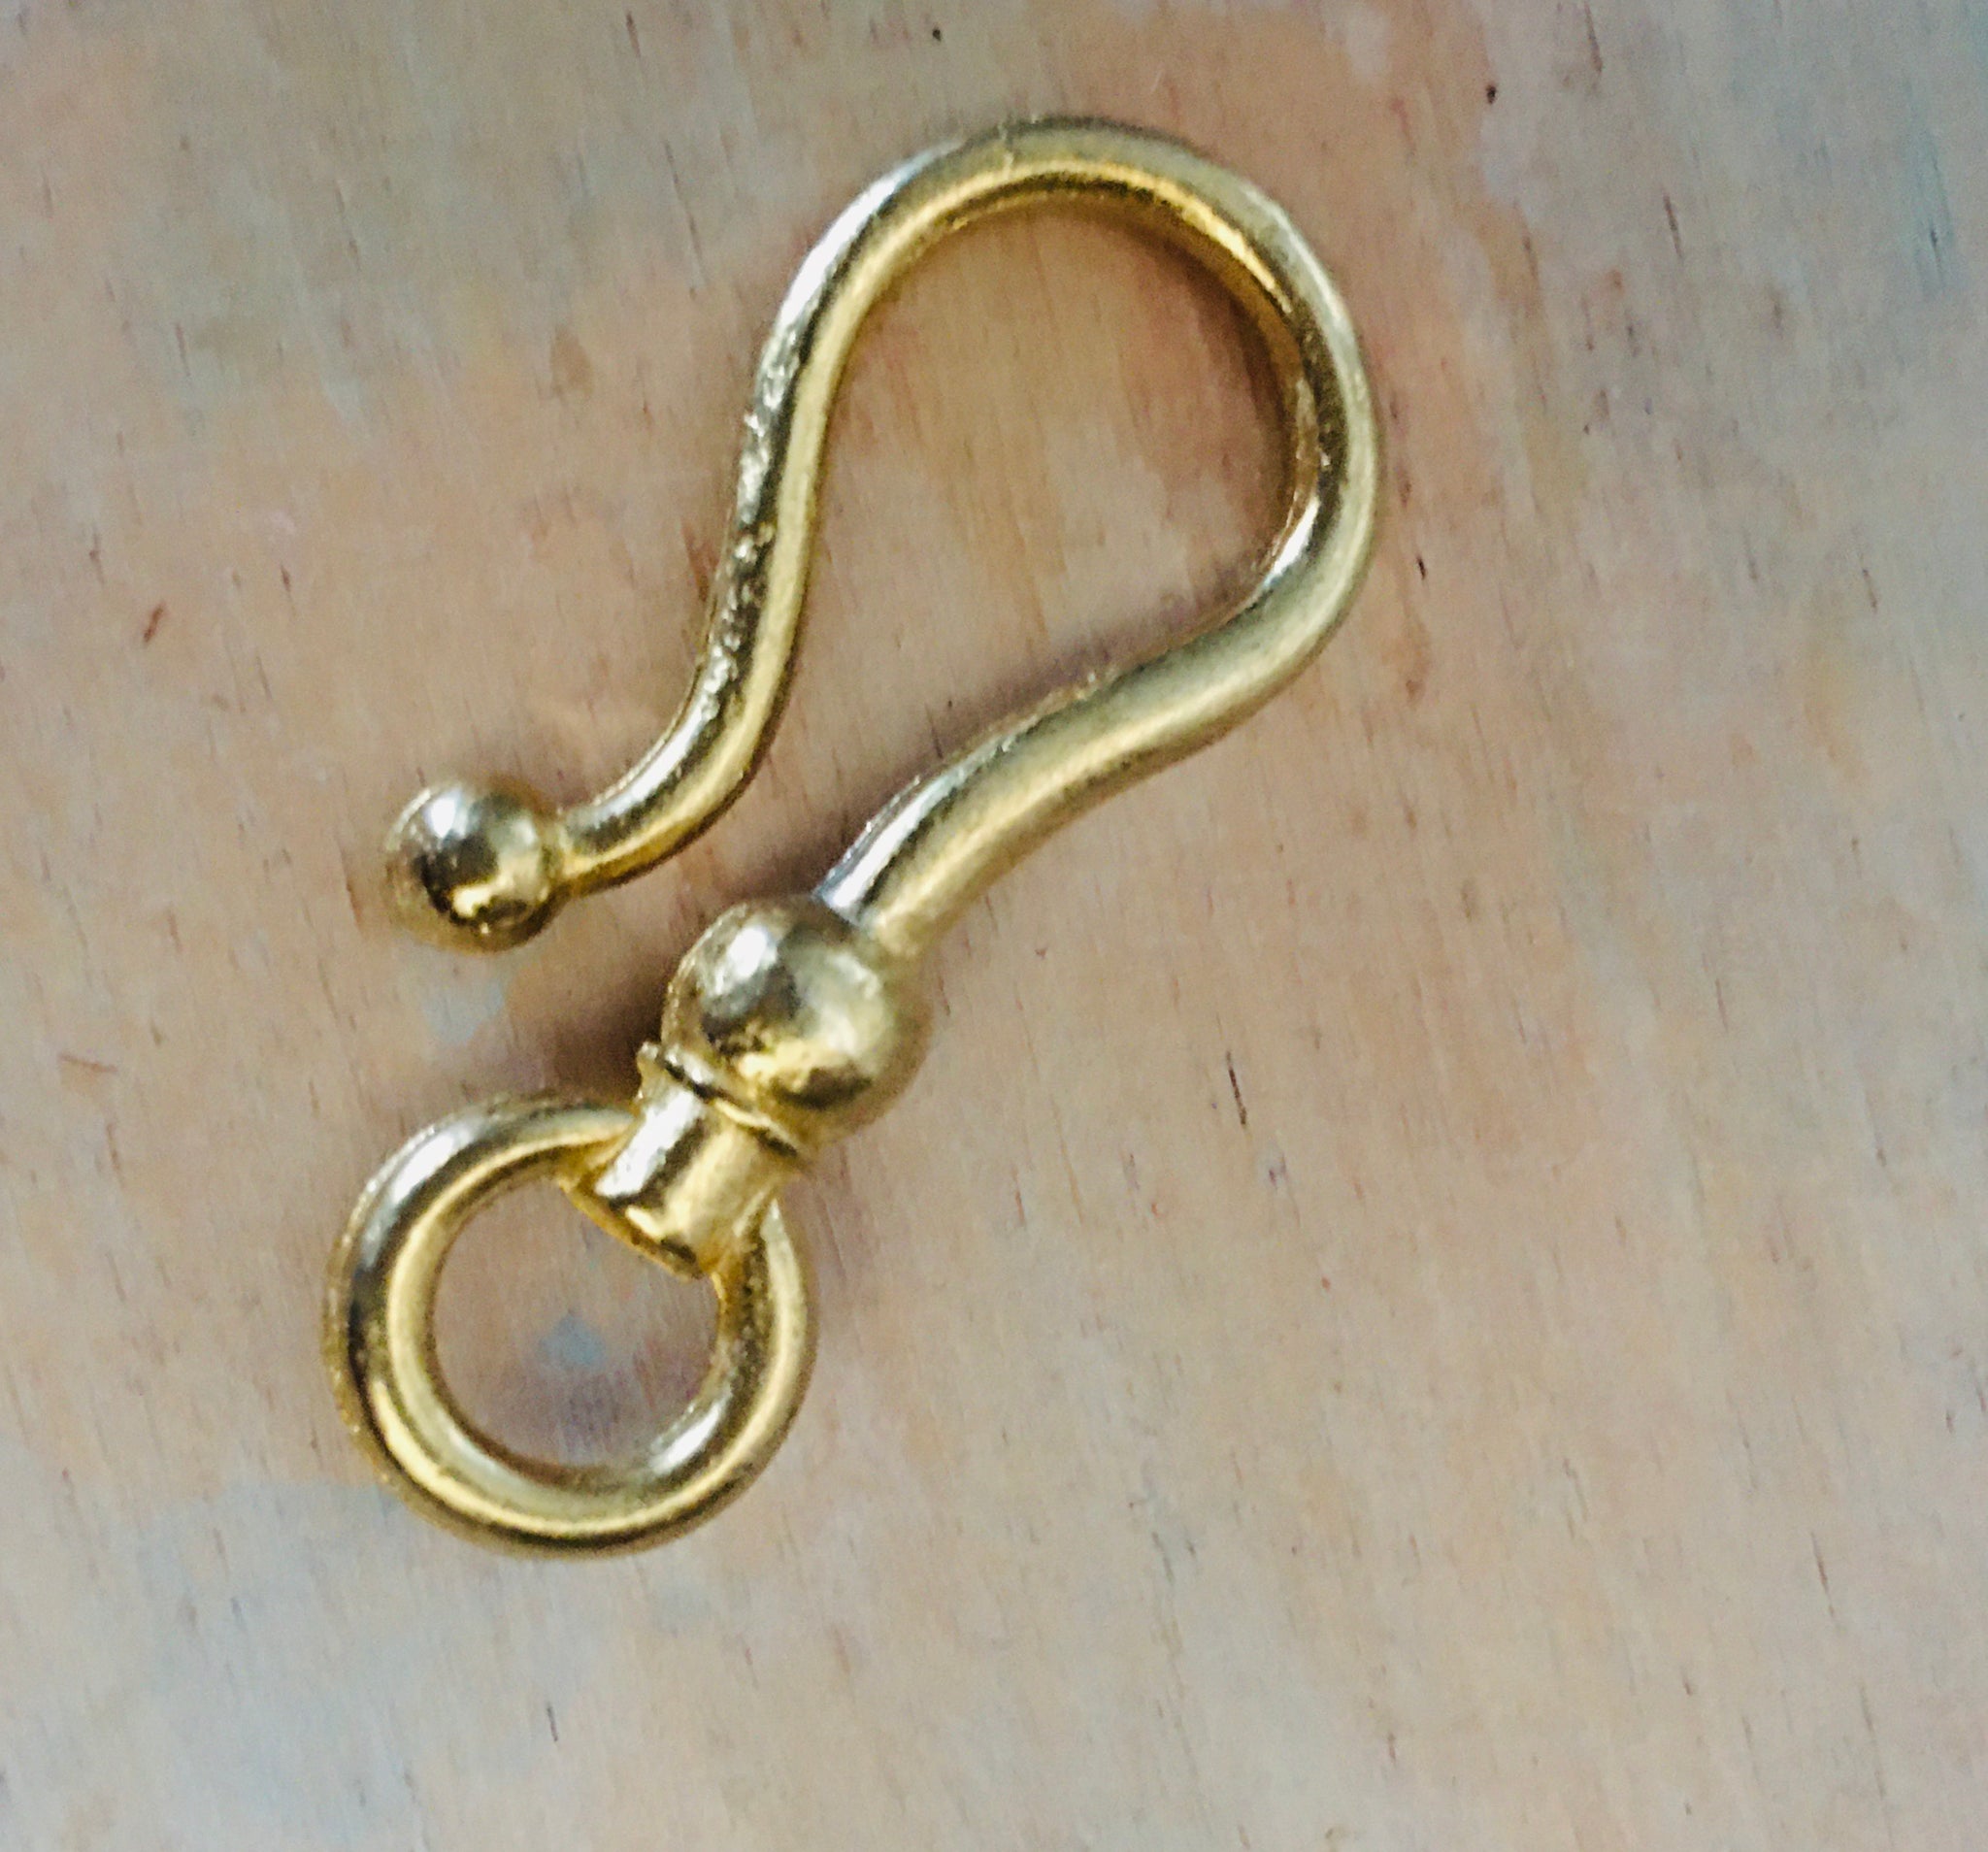 Large hook clasp